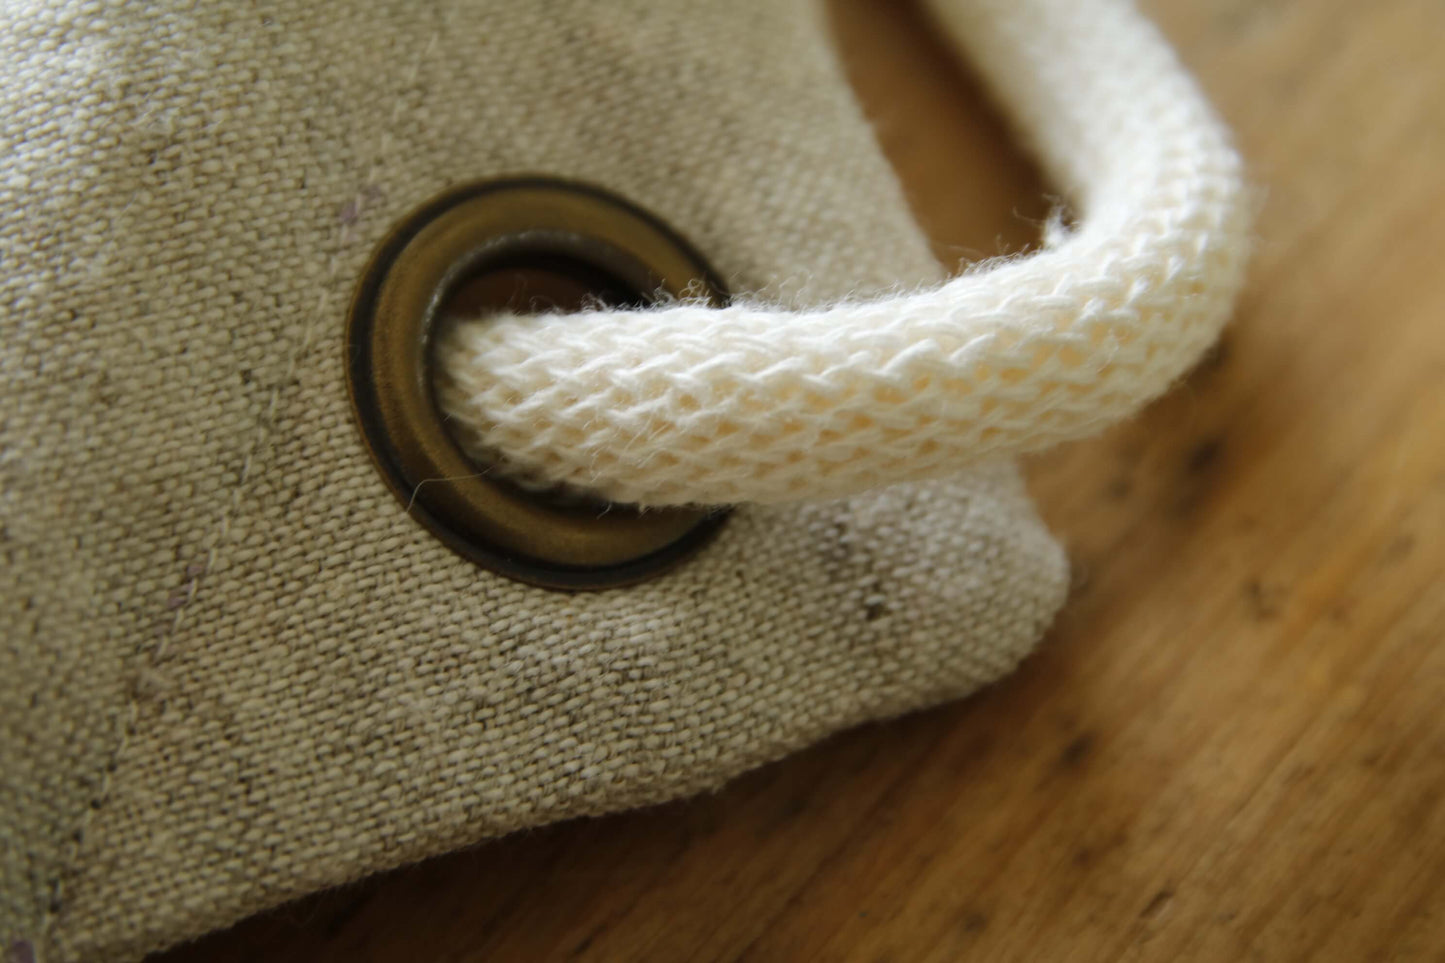 Linen bag, beige with white cord and sailing ship stamp